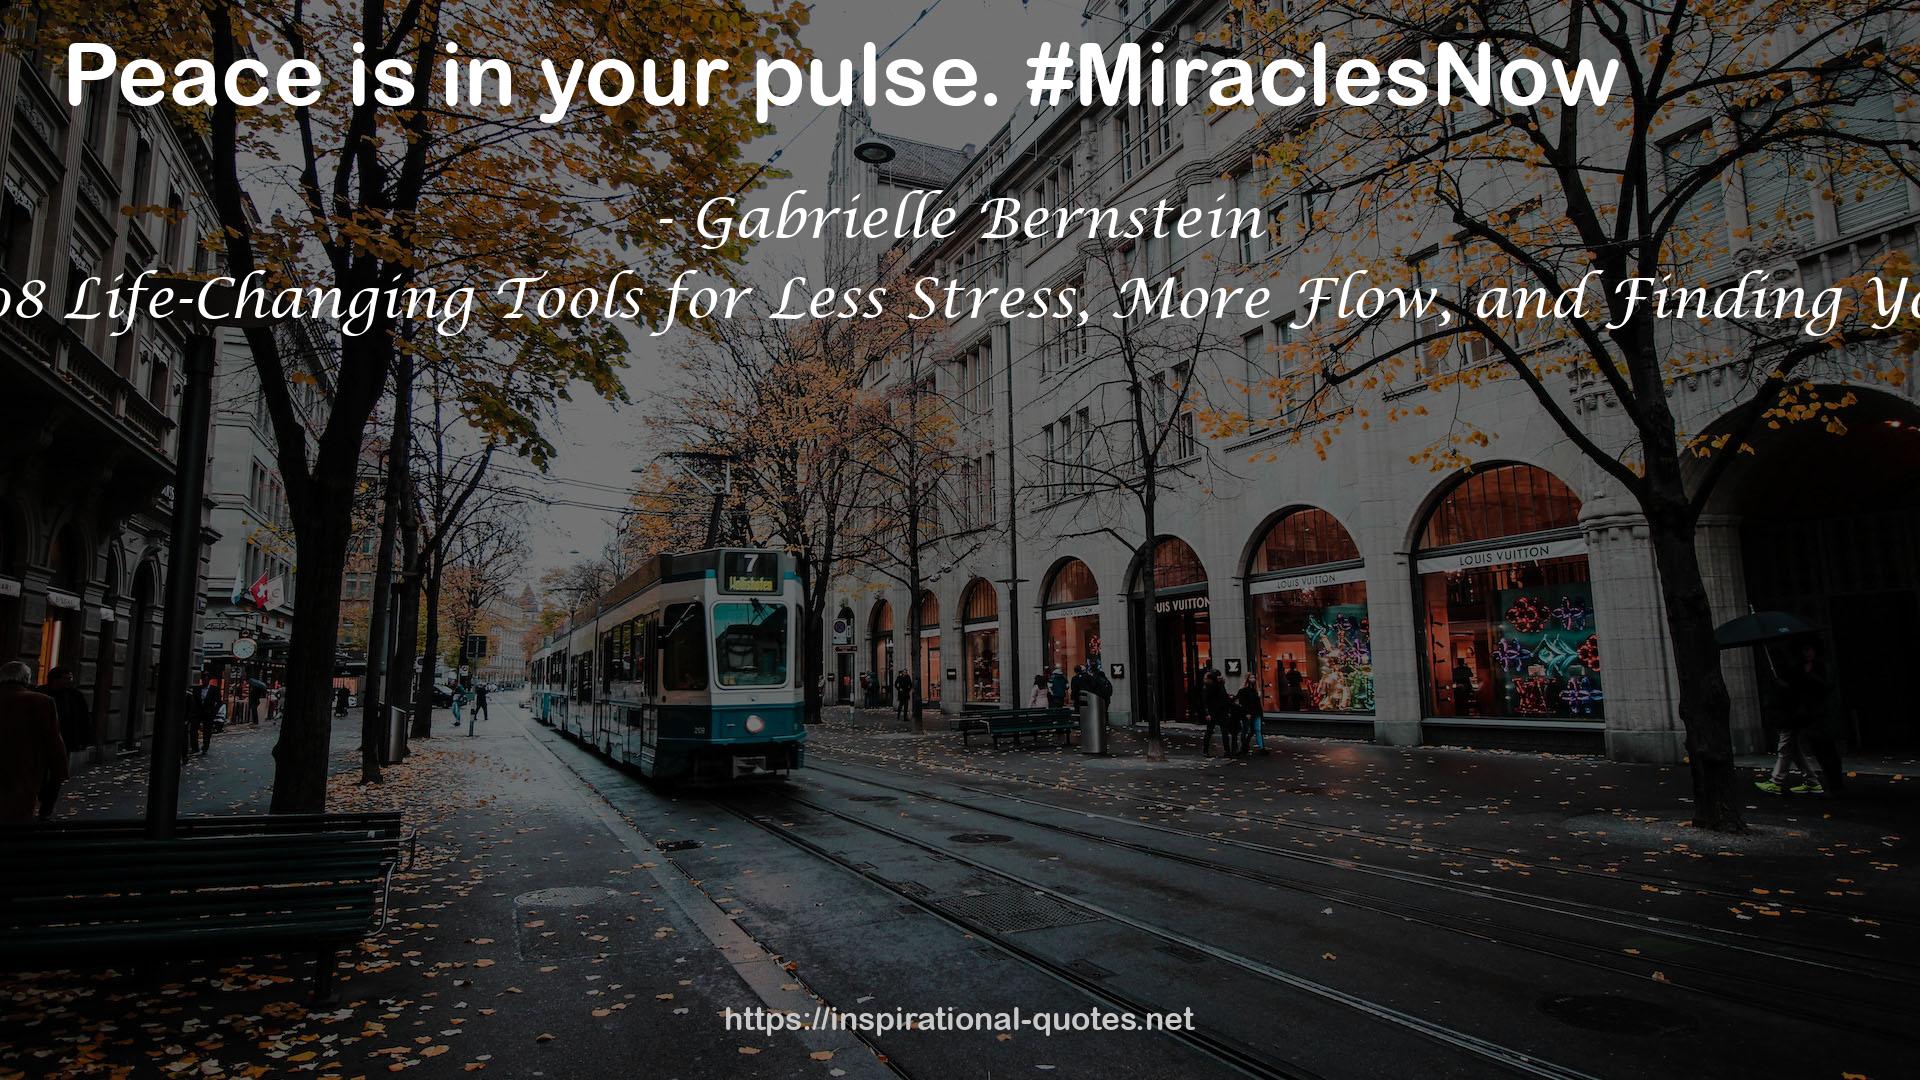 Miracles Now: 108 Life-Changing Tools for Less Stress, More Flow, and Finding Your True Purpose QUOTES